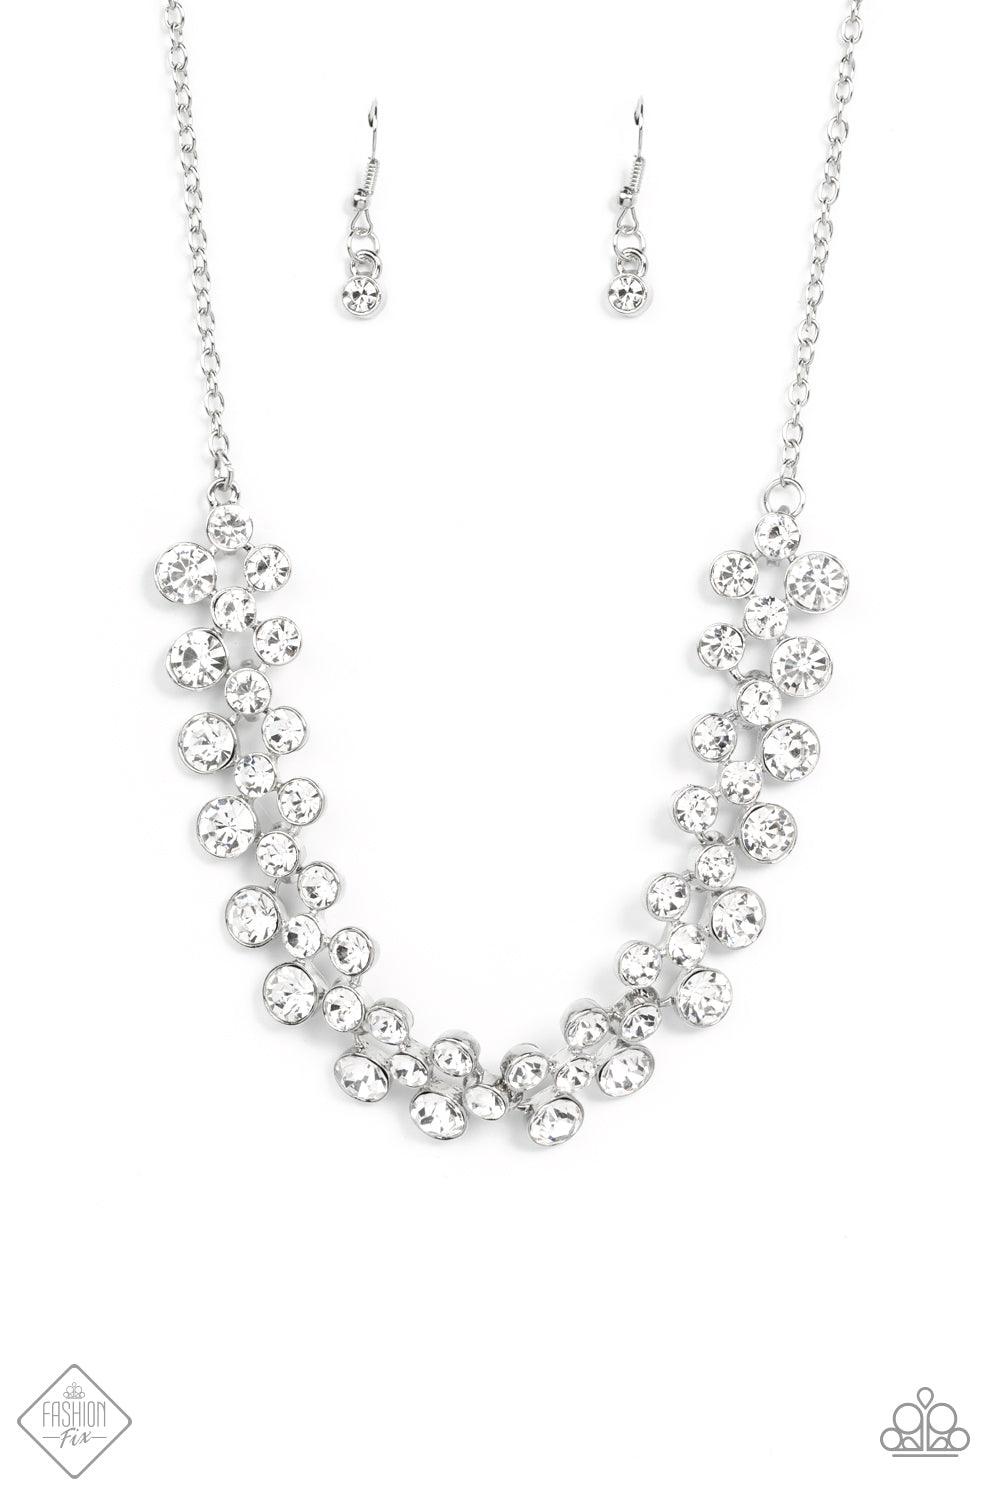 Paparazzi Accessories Won The Lottery - White Layers of brilliant white rhinestones in graduating sizes are encased in simple silver frames as they fall from a classic silver chain and delicately link across the collar, creating a dramatic display of swoo